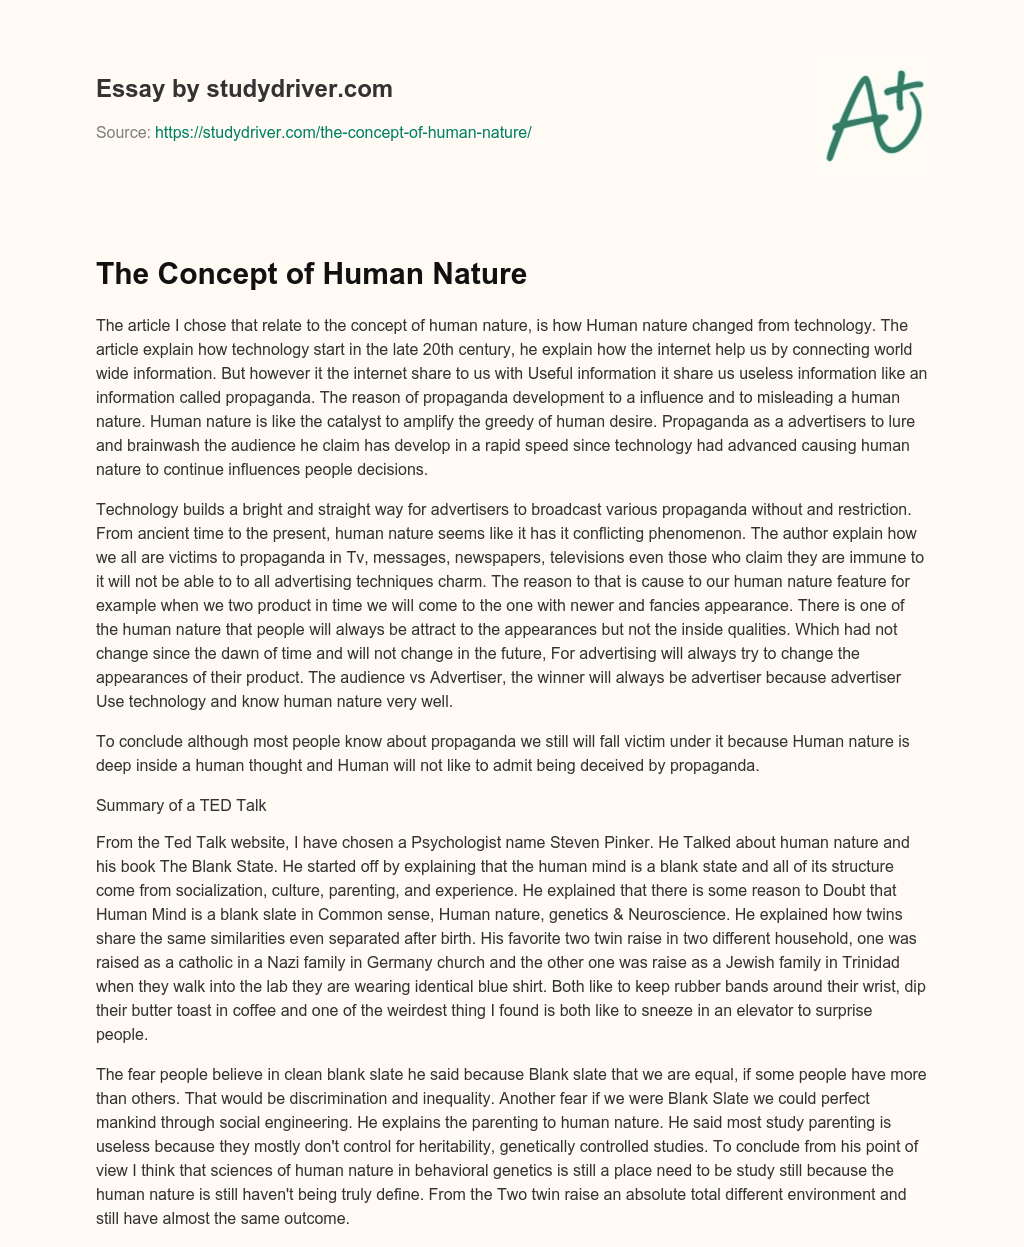 The Concept of Human Nature essay